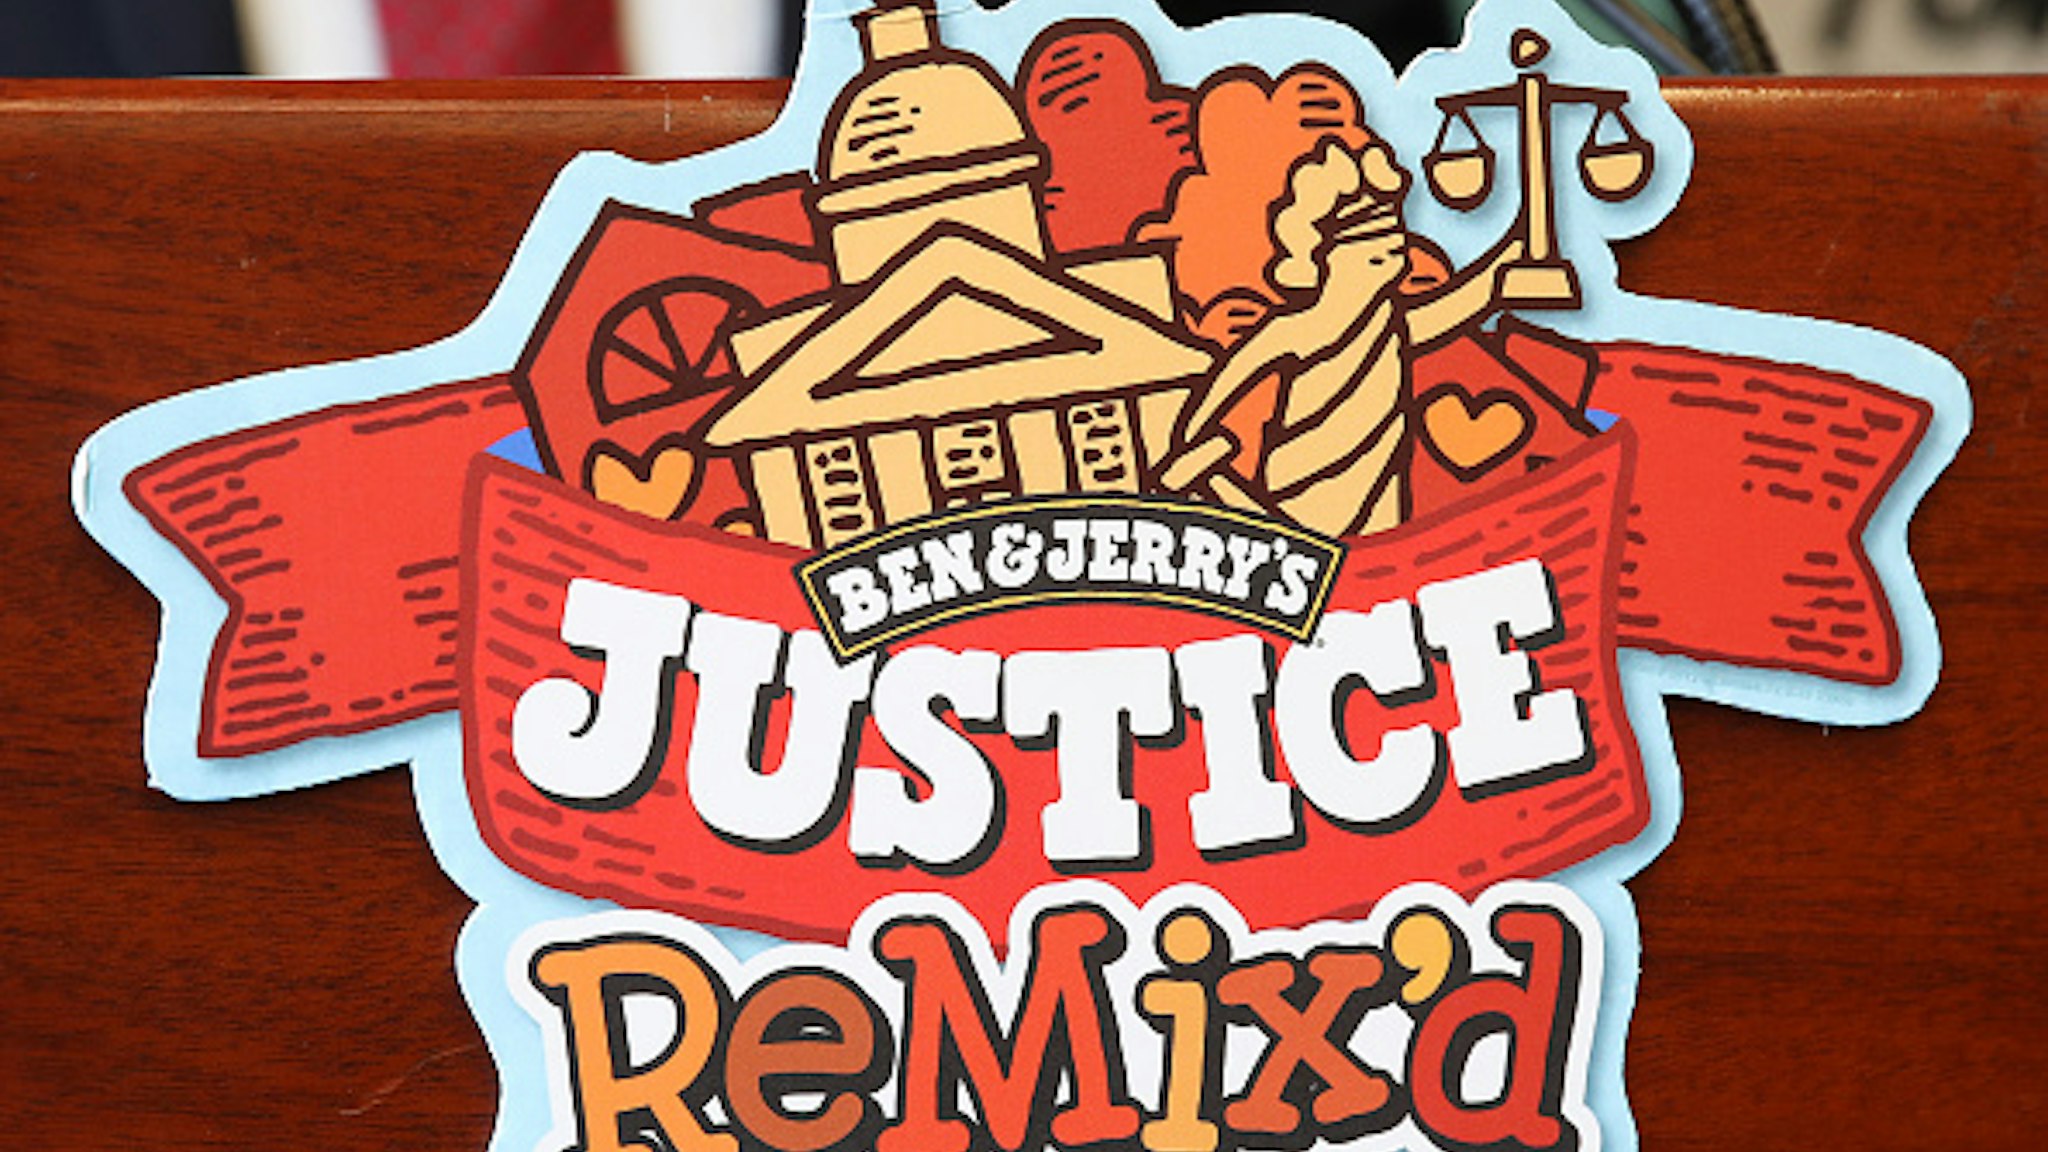 Ben & Jerry's announced a new flavor, Justice Remix'd, at a press conference September 03, 2019 in Washington, DC.